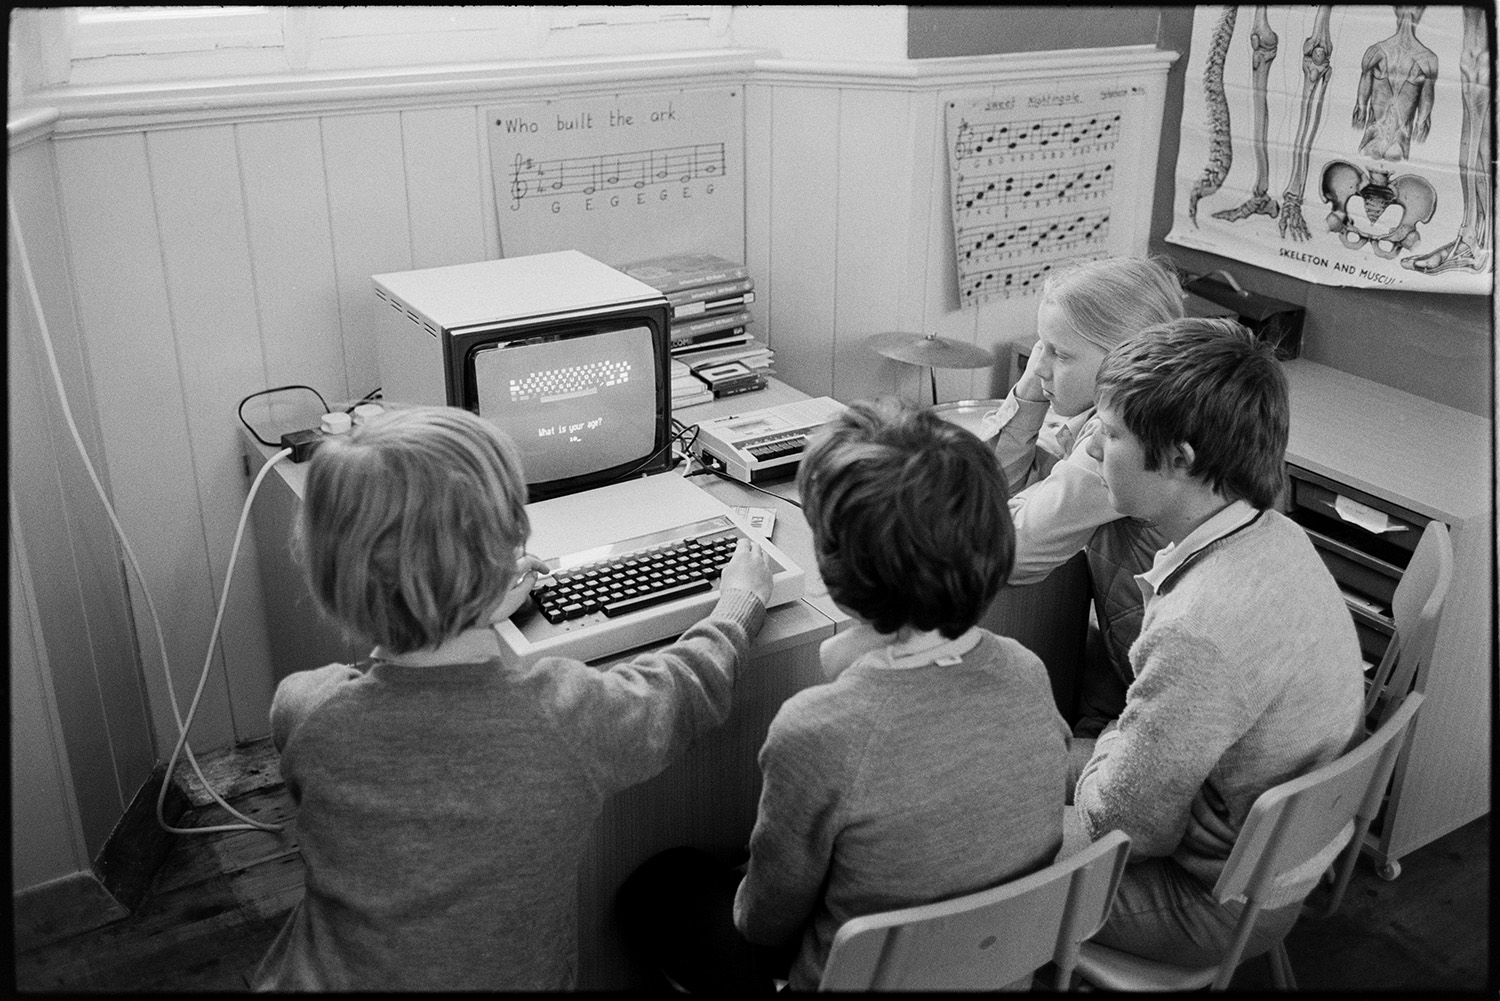 Schoolchildren using computer BBC Micro.
[Four children grouped round a BBC Micro computer in Dolton Primary School. Music and a poster of a human skeleton is displayed on the walls behind them.]